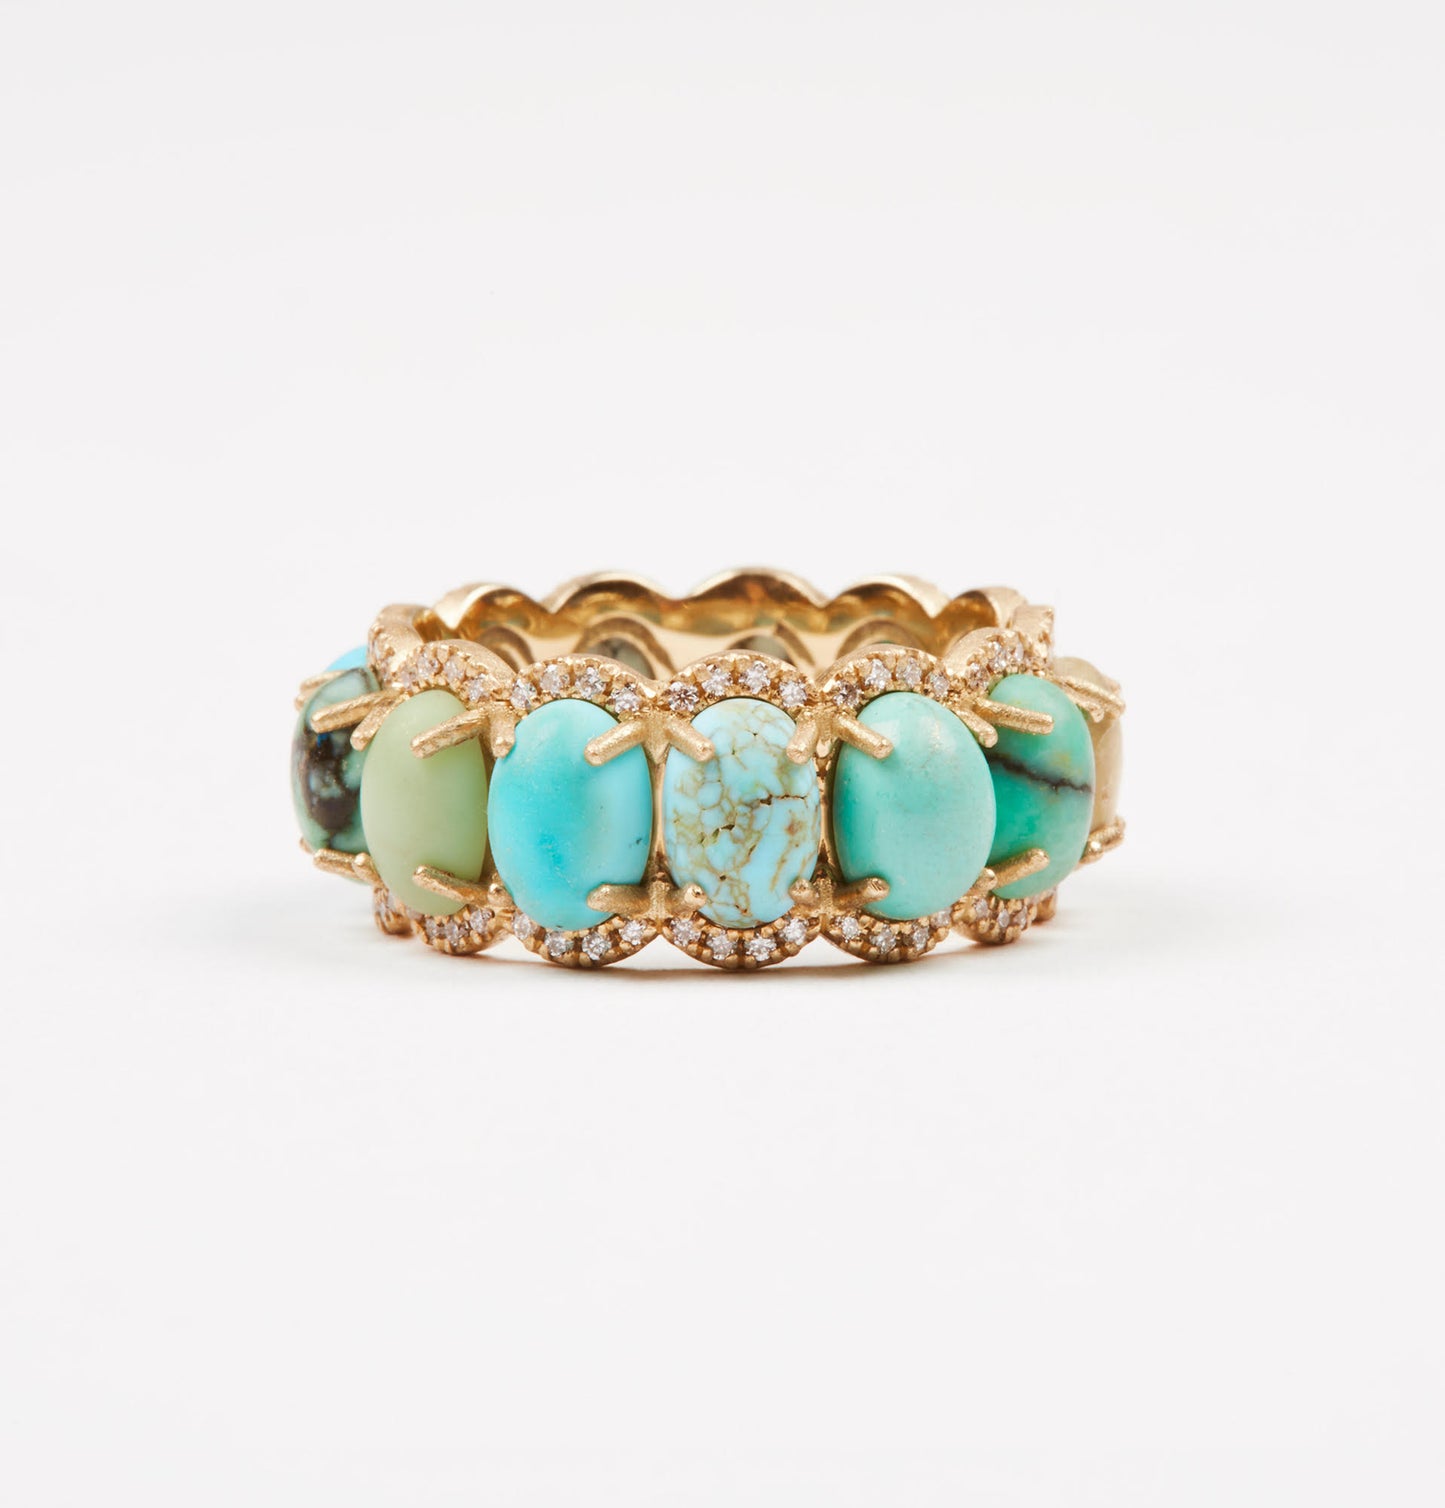 Turquoise and Variscite Ring with Diamond Surround